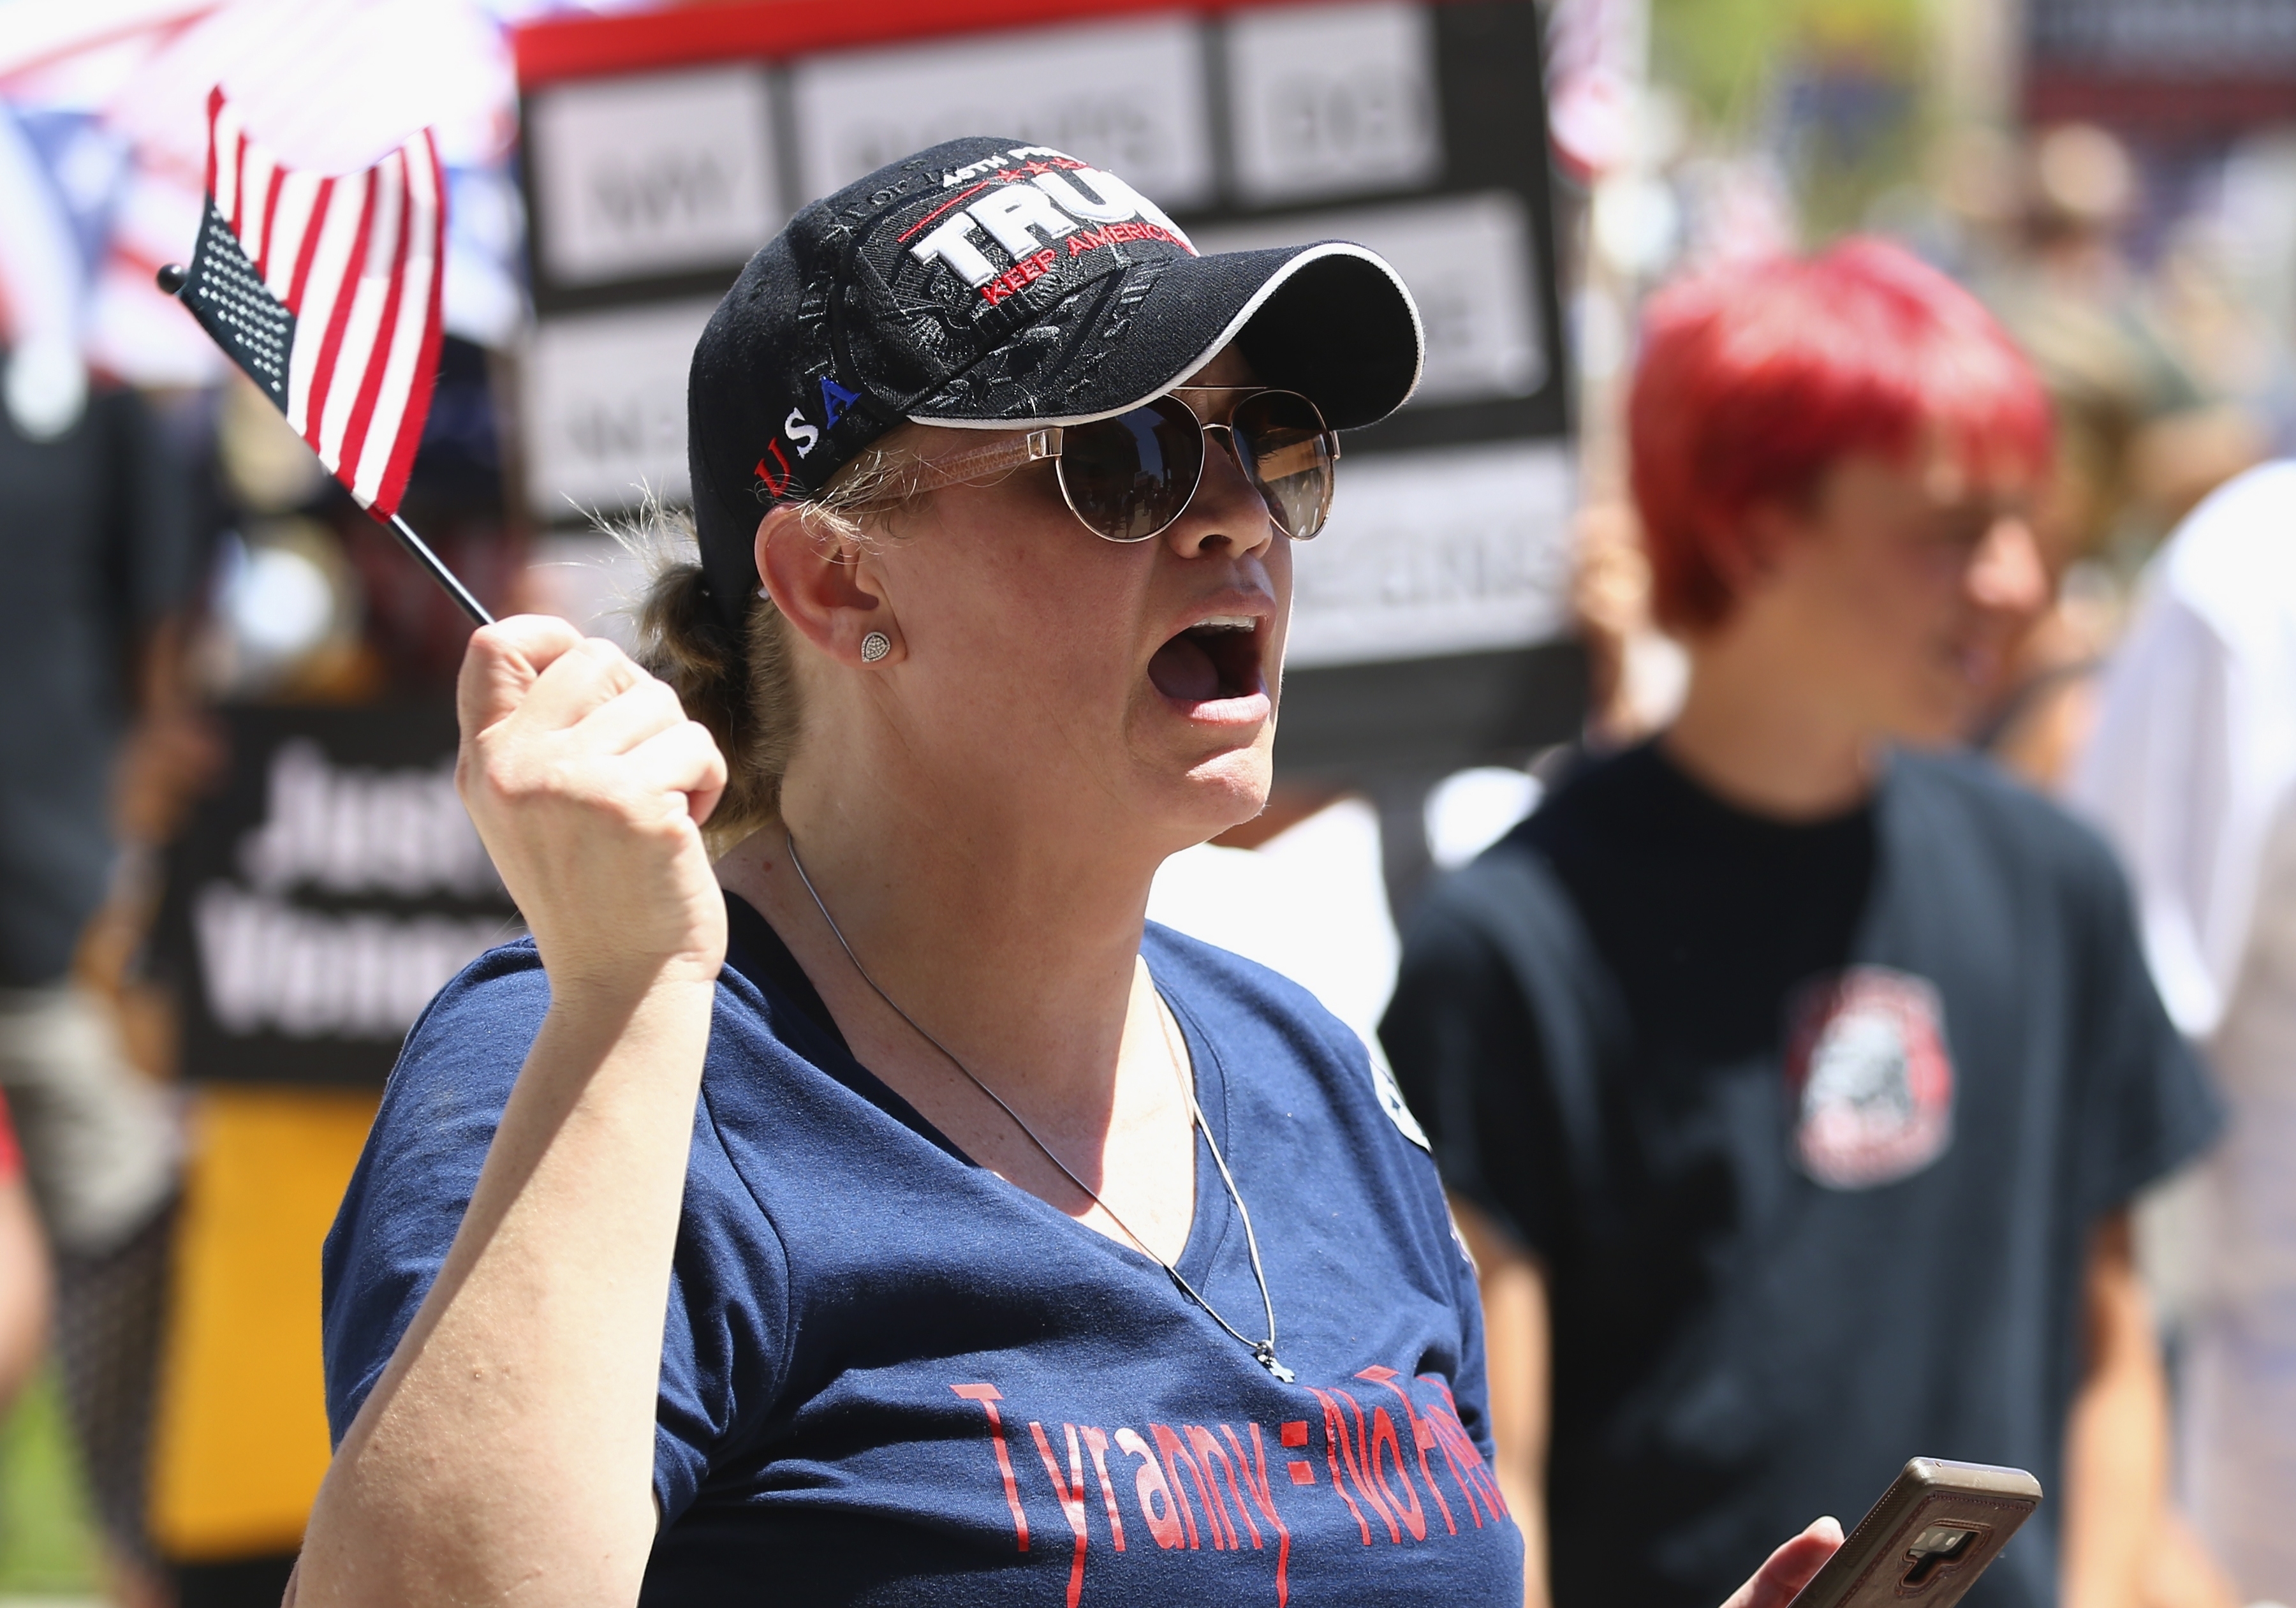 A protester shouts at a rally at the Capitol to 're-open' Arizona against the governor's stay-at-home order due to the coronavirus Monday, April 20, 2020, in Phoenix. (AP Photo/Ross D. Franklin)